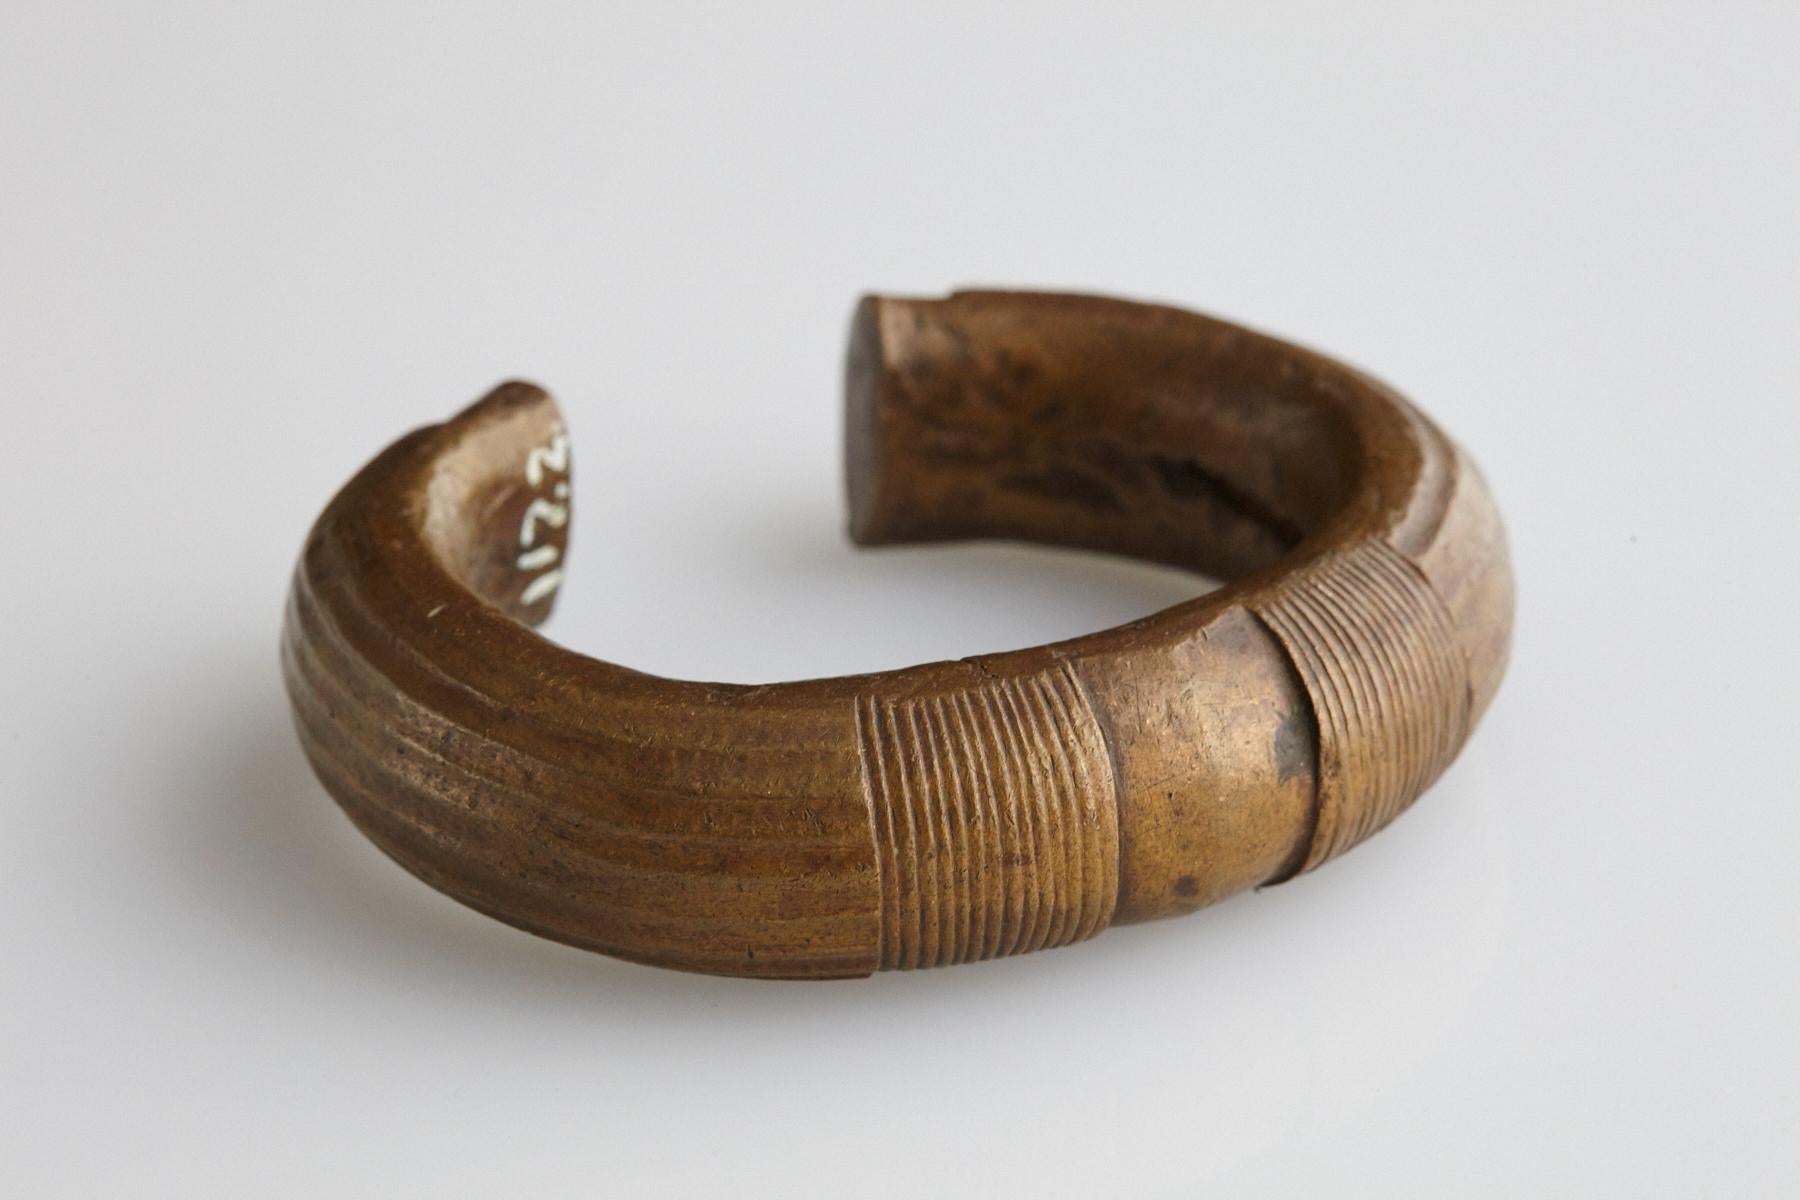 Bronze Currency Bracelet/Manilla, Dogon People, Burkina Faso, 19th c. - No 2 For Sale 1